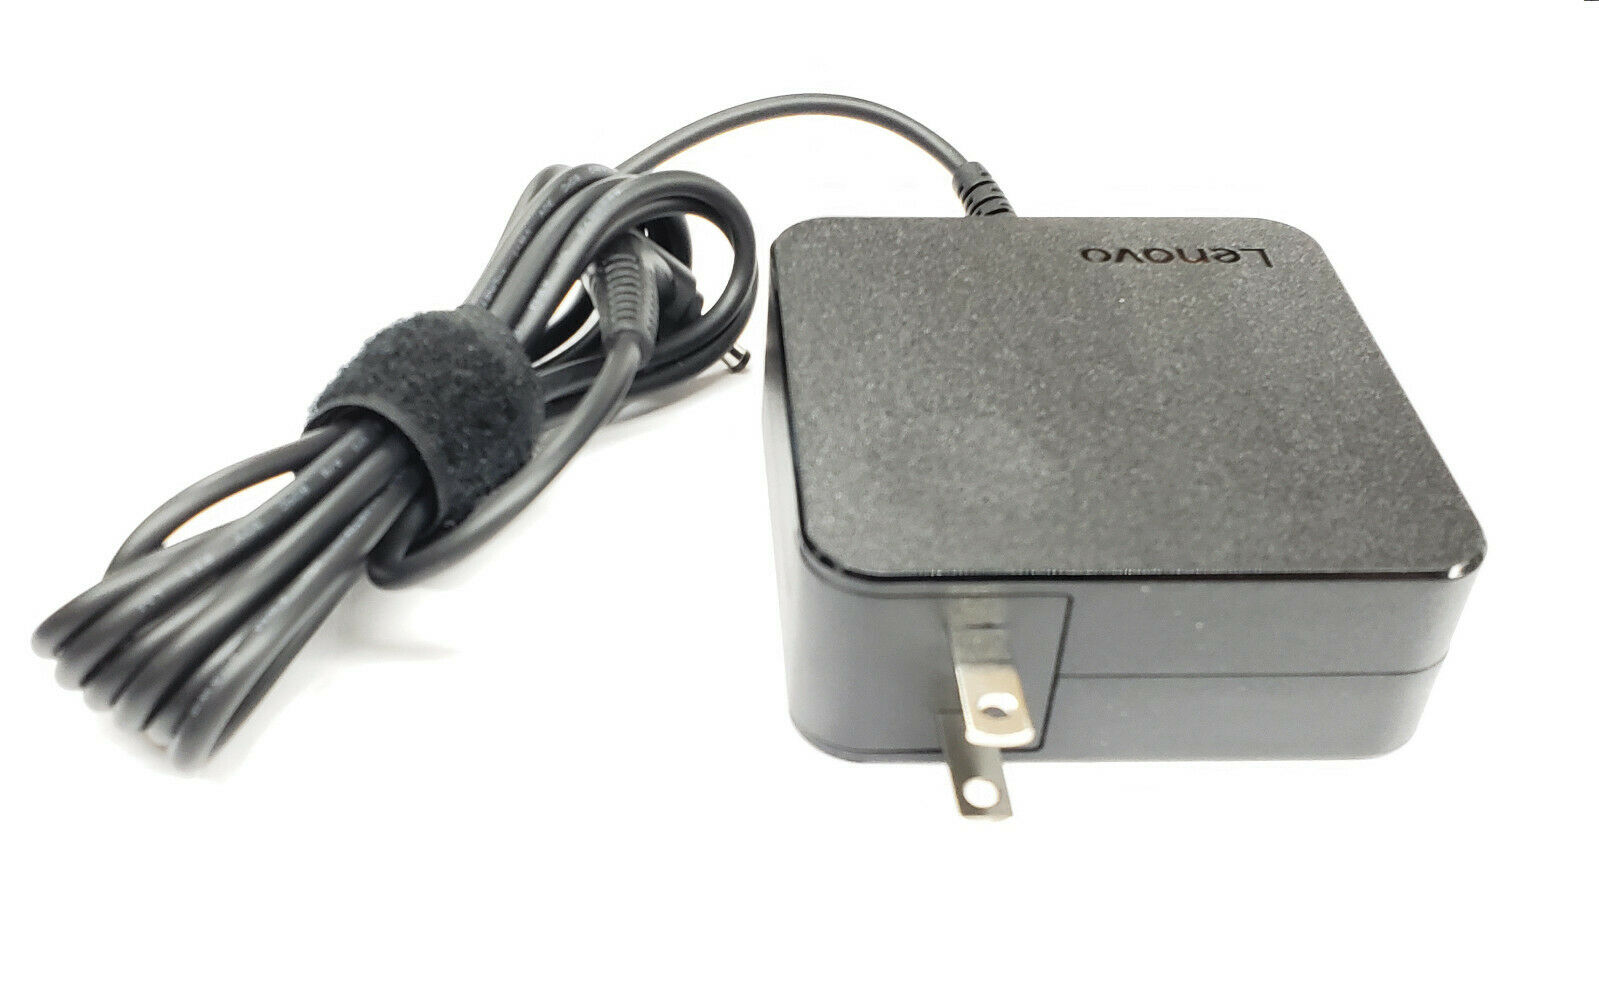 New Genuine Lenovo 65W AC Power Laptop Charger Adapter IdeaPad S340 81N8005DUS Country/Region of Manufacture: China C - Click Image to Close